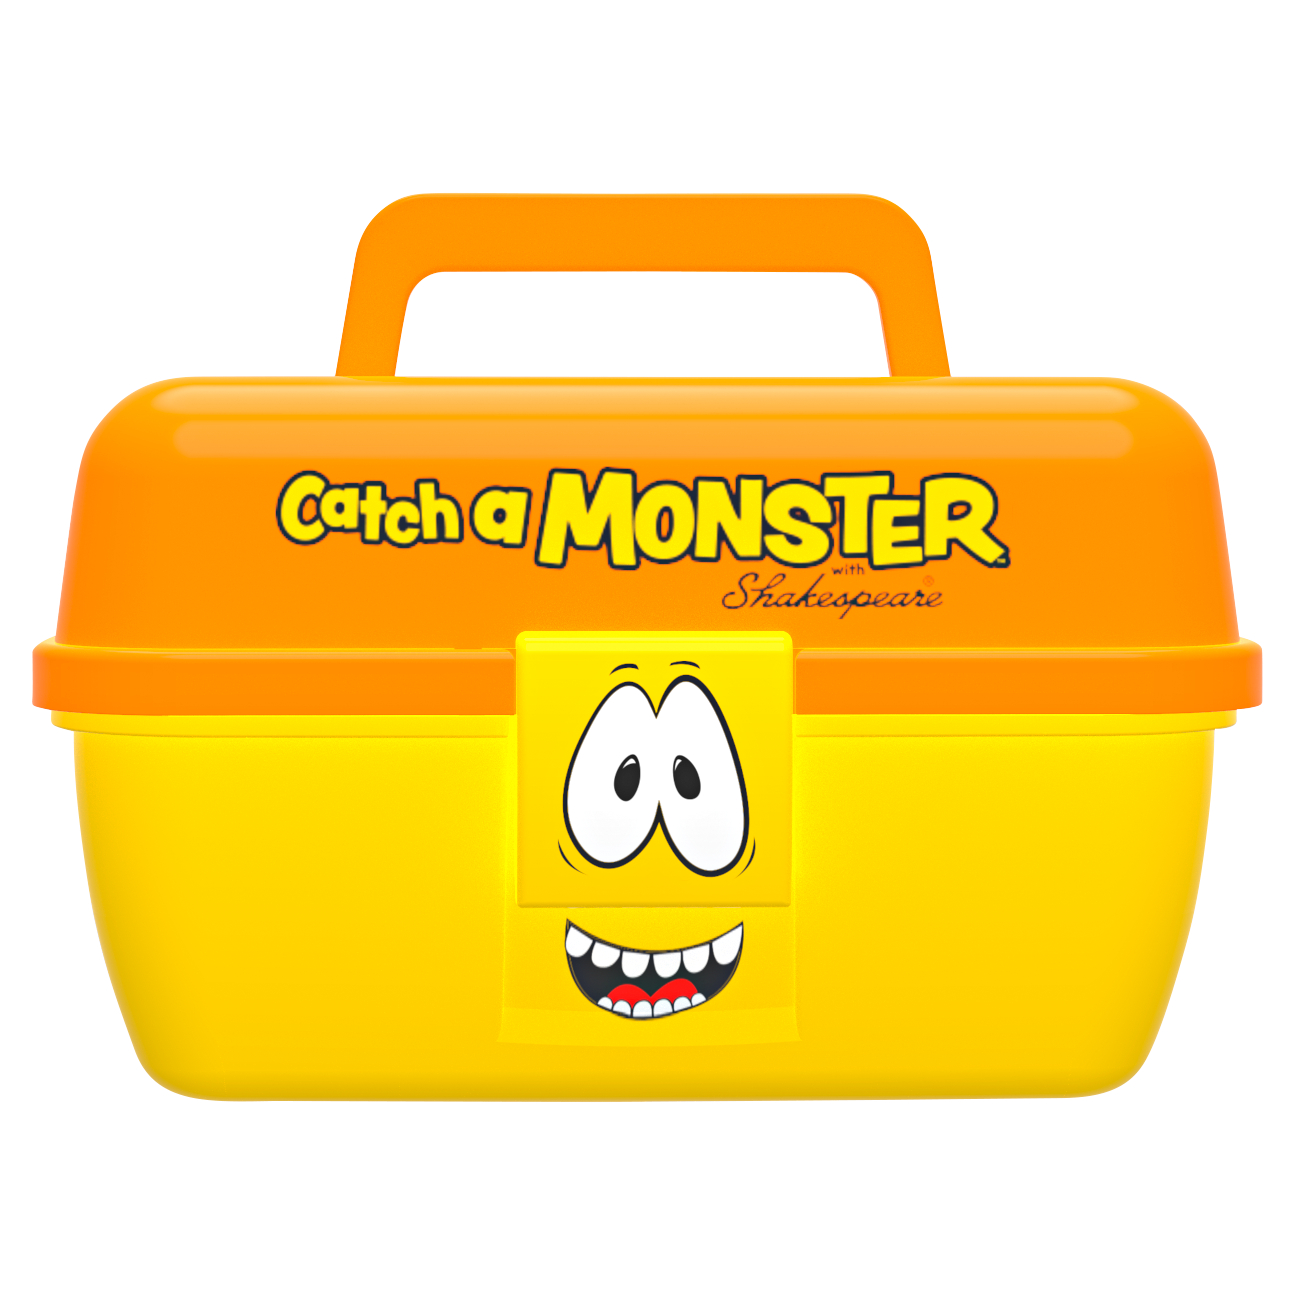 Shakespeare Multipurpose Catch a Monster Play Box (yellow) 